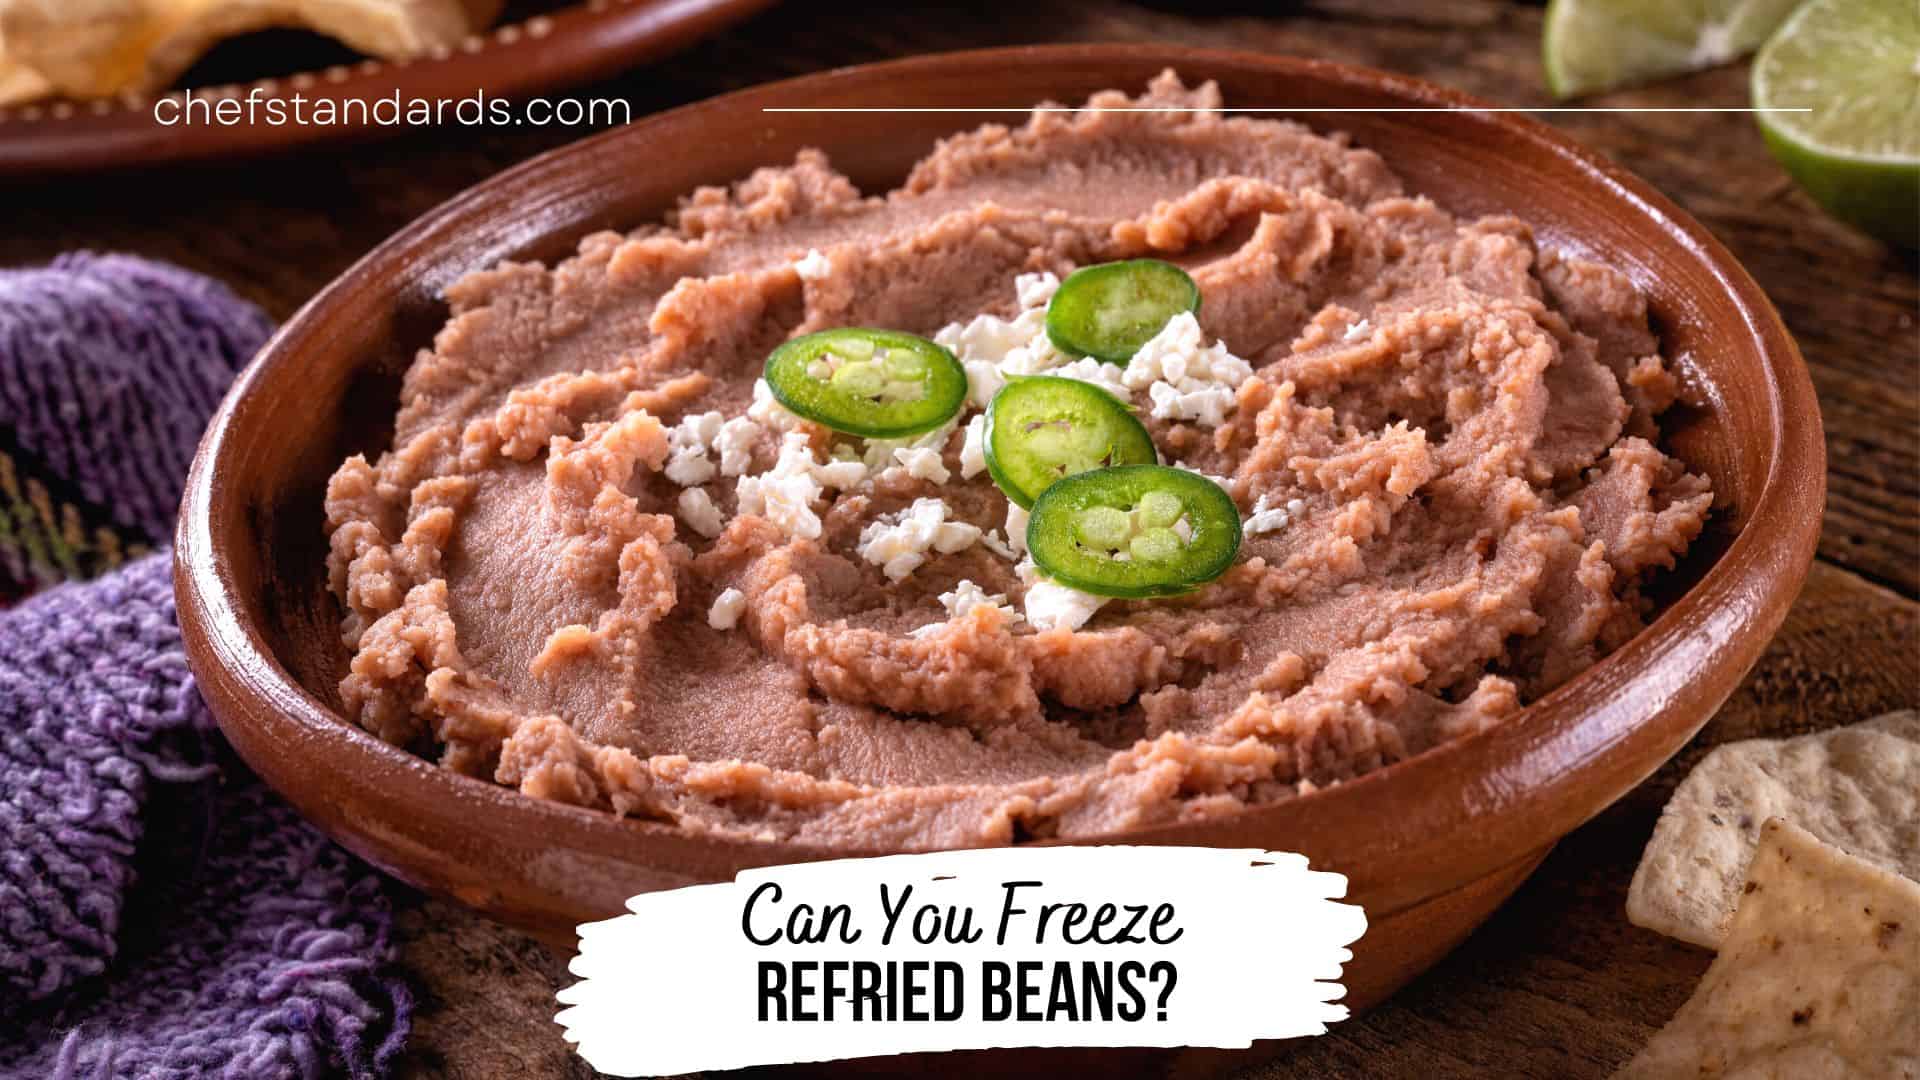 photo of a meal with refried beans